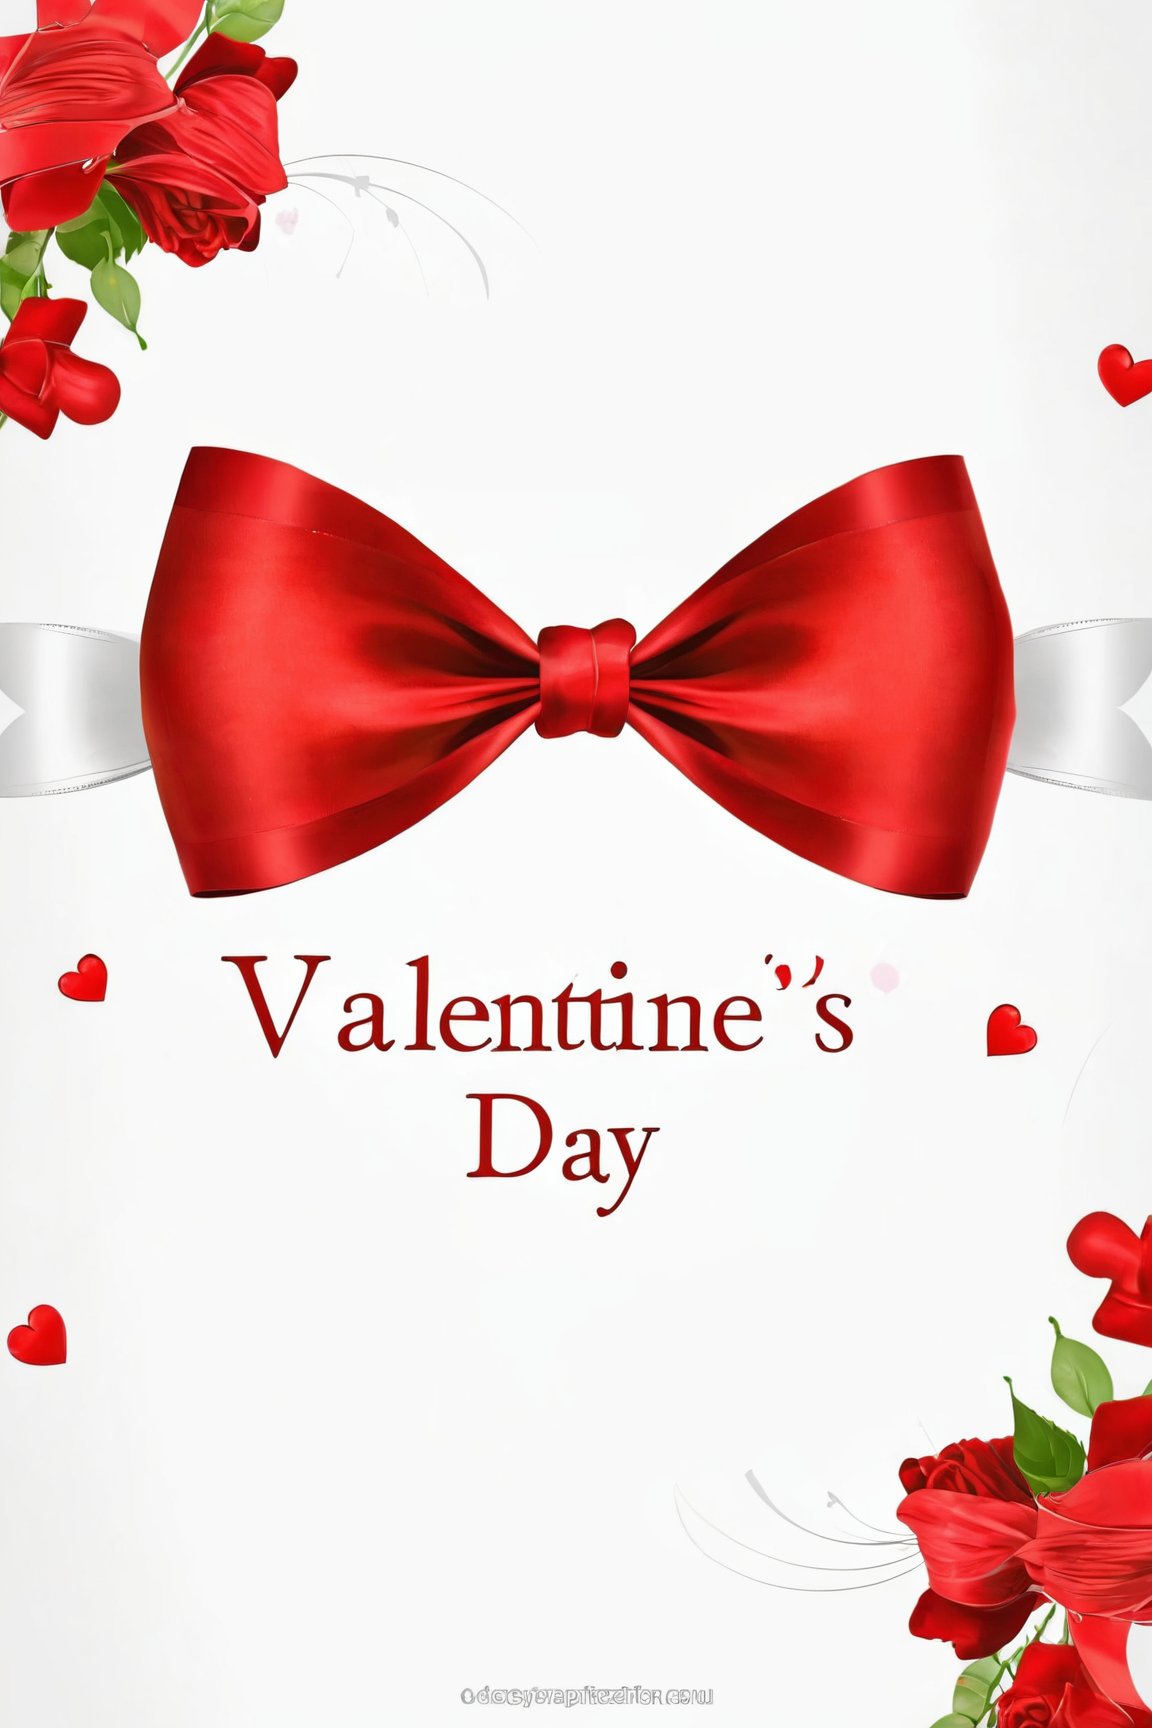 AiArtV,Valentines Day, simple background,white background,bow,ribbon,flower,red bow,no humans,red flower